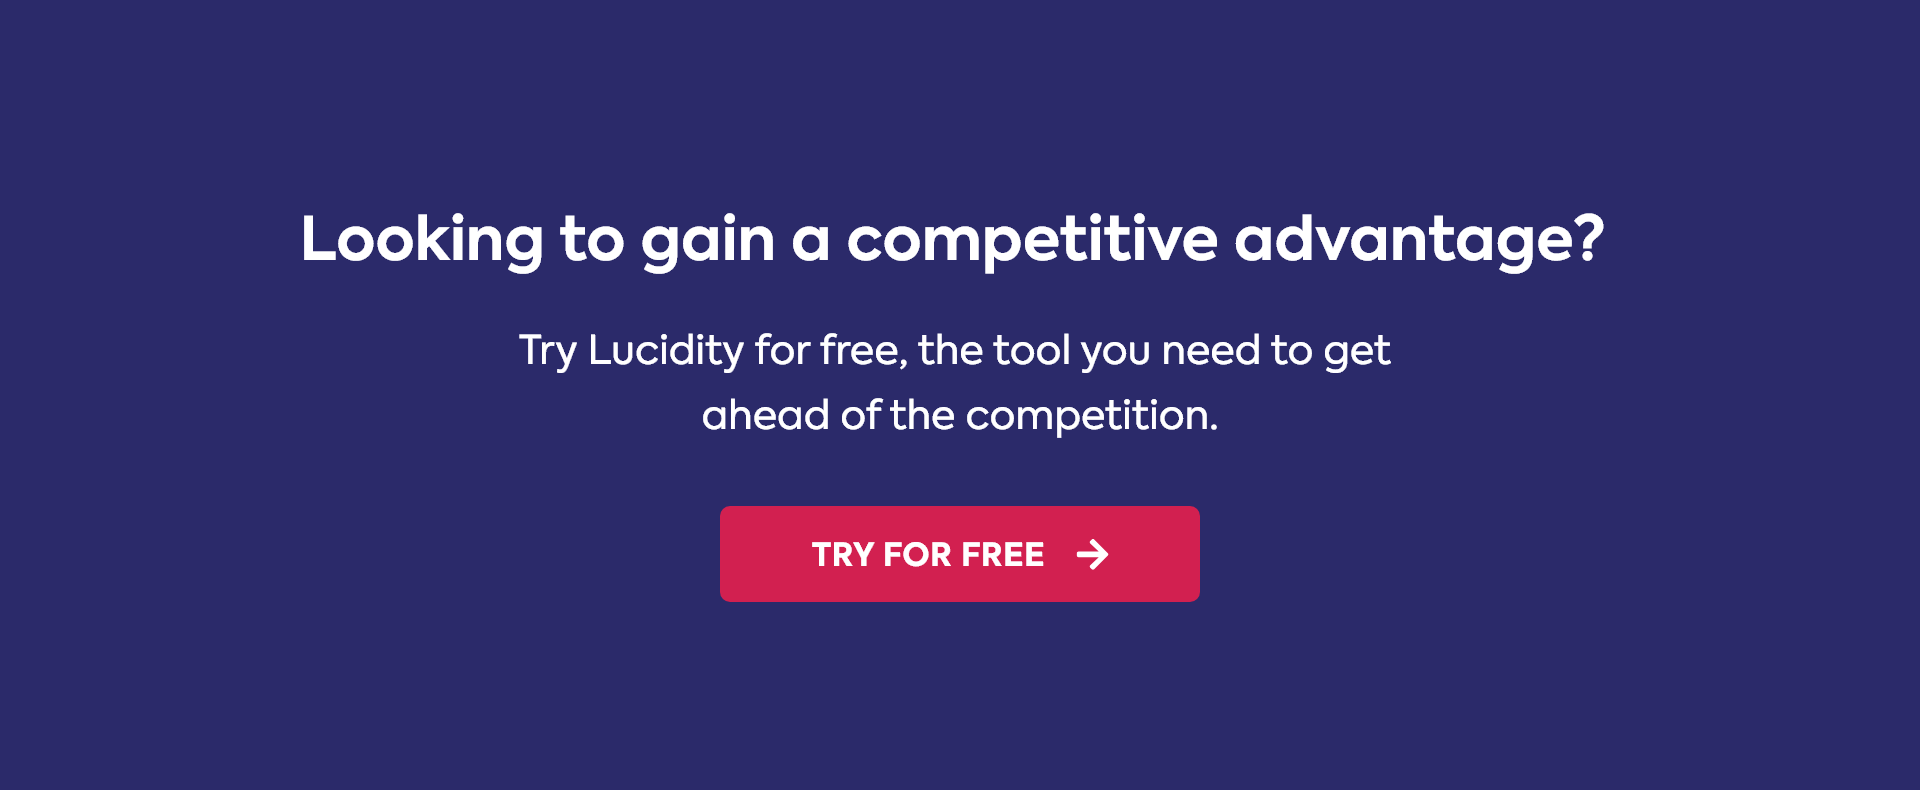 Looking to gain a competative advantage? Try Lucidity for free, the tool you need to get ahead of the competition. 